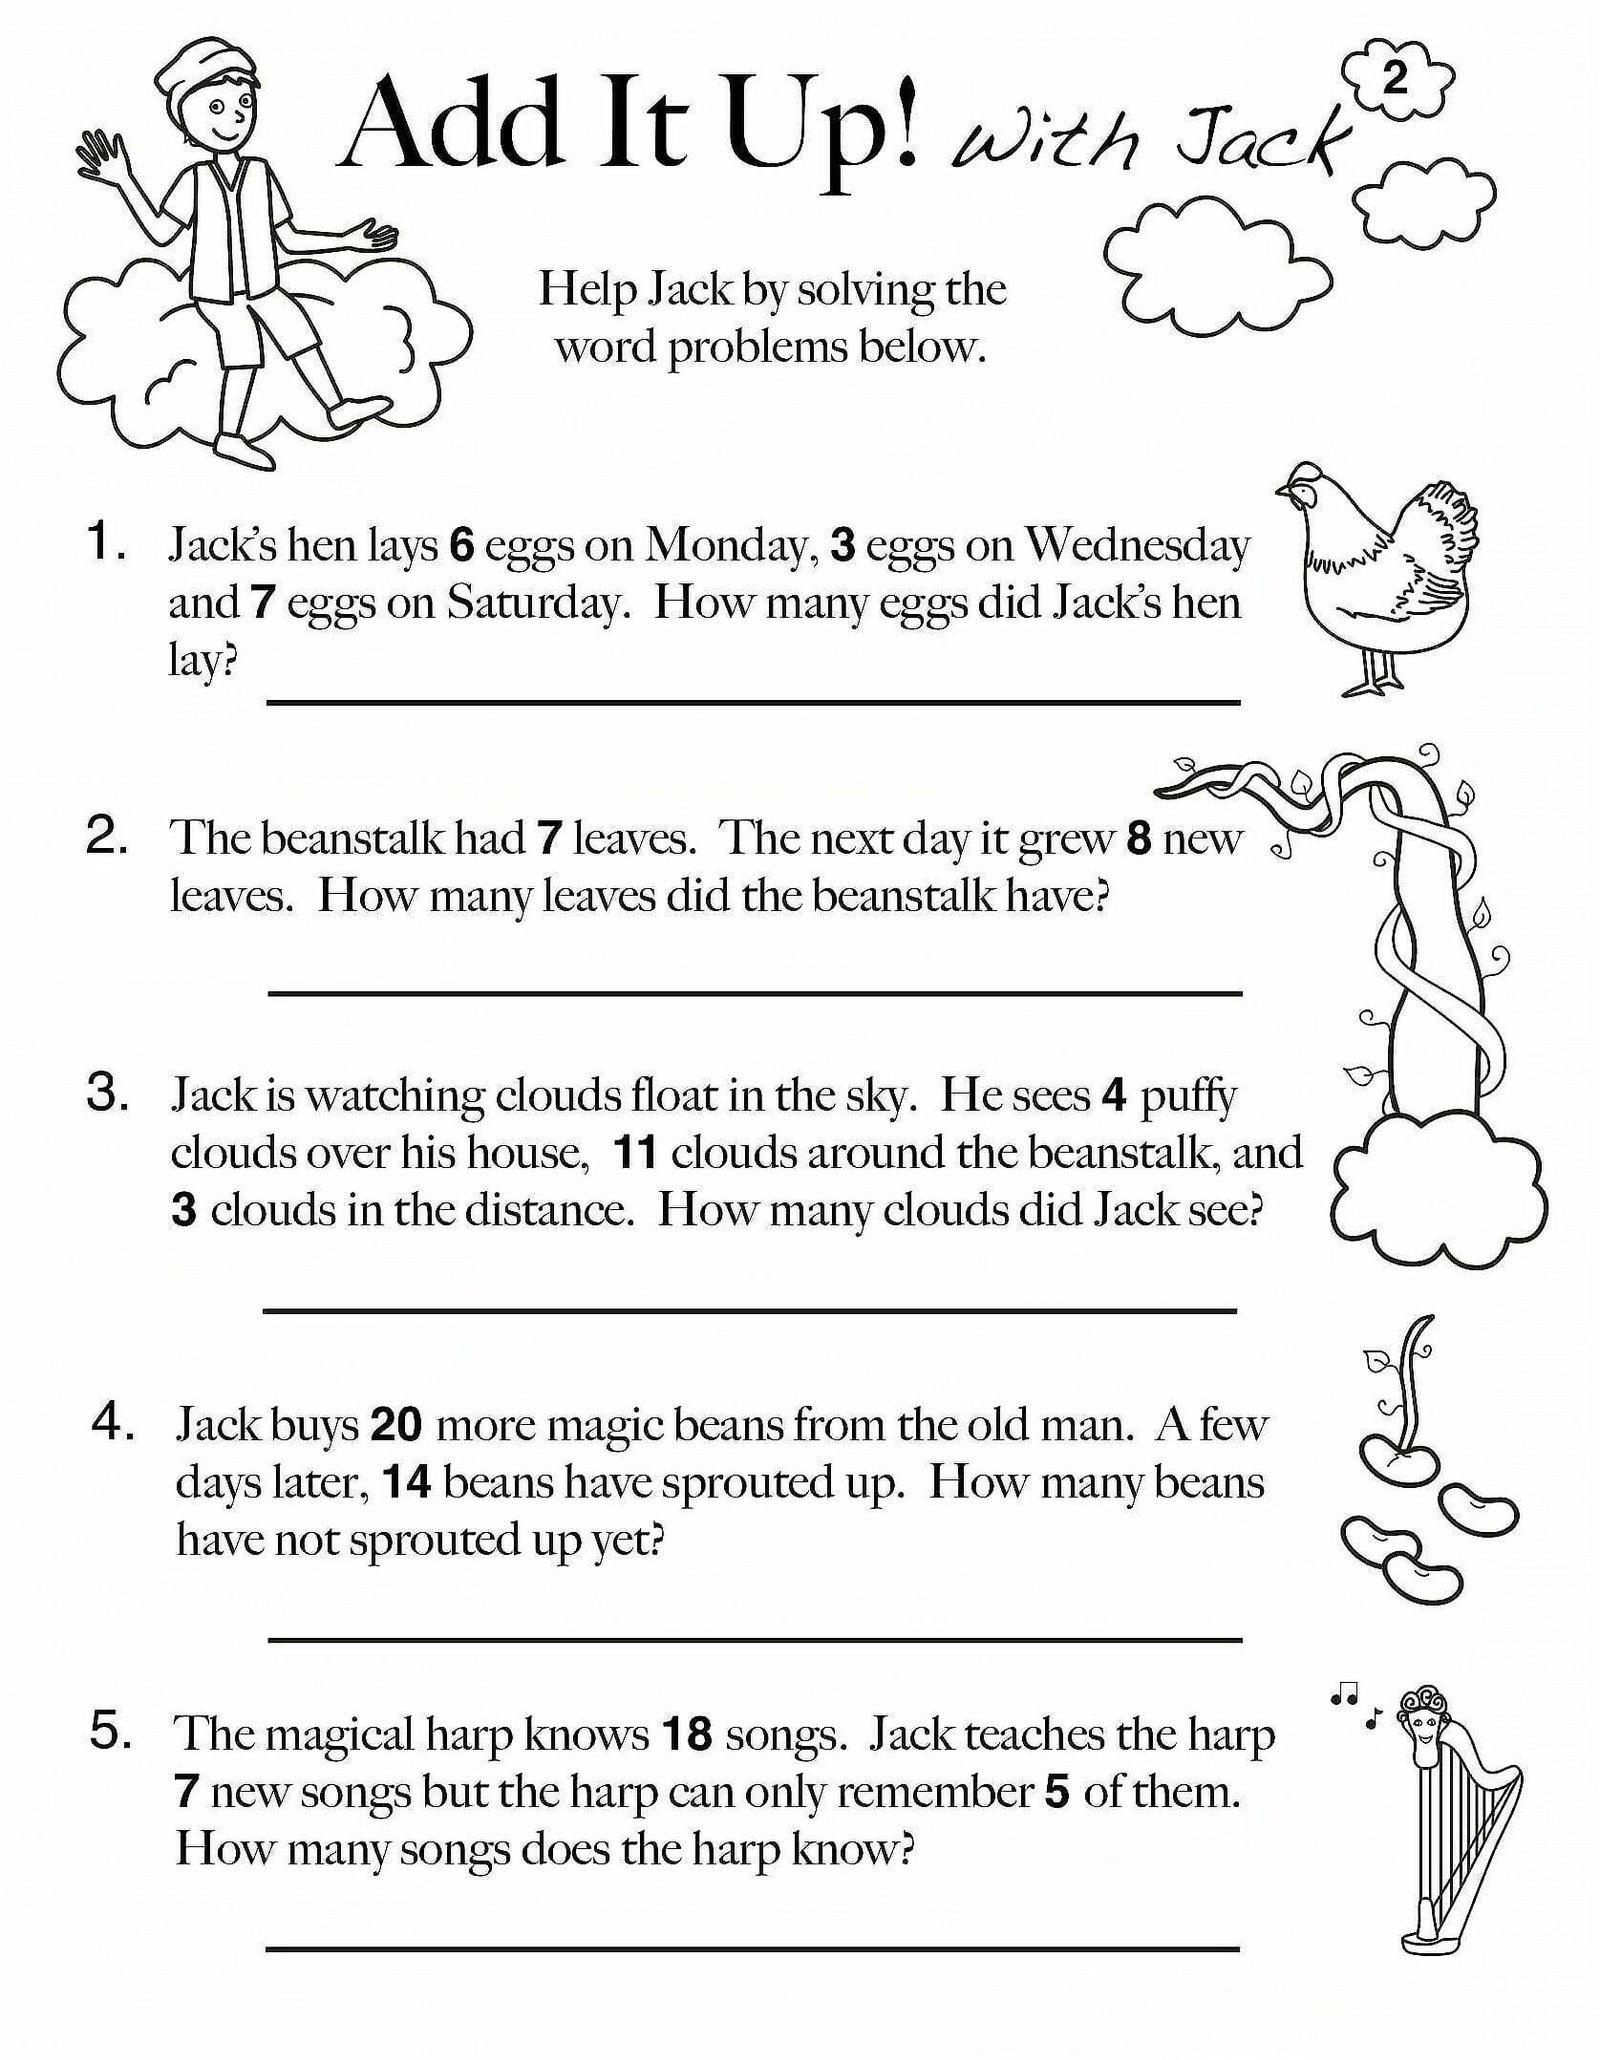 10 Amazing 1st Grade Math Word Problems Worksheets Samples ...